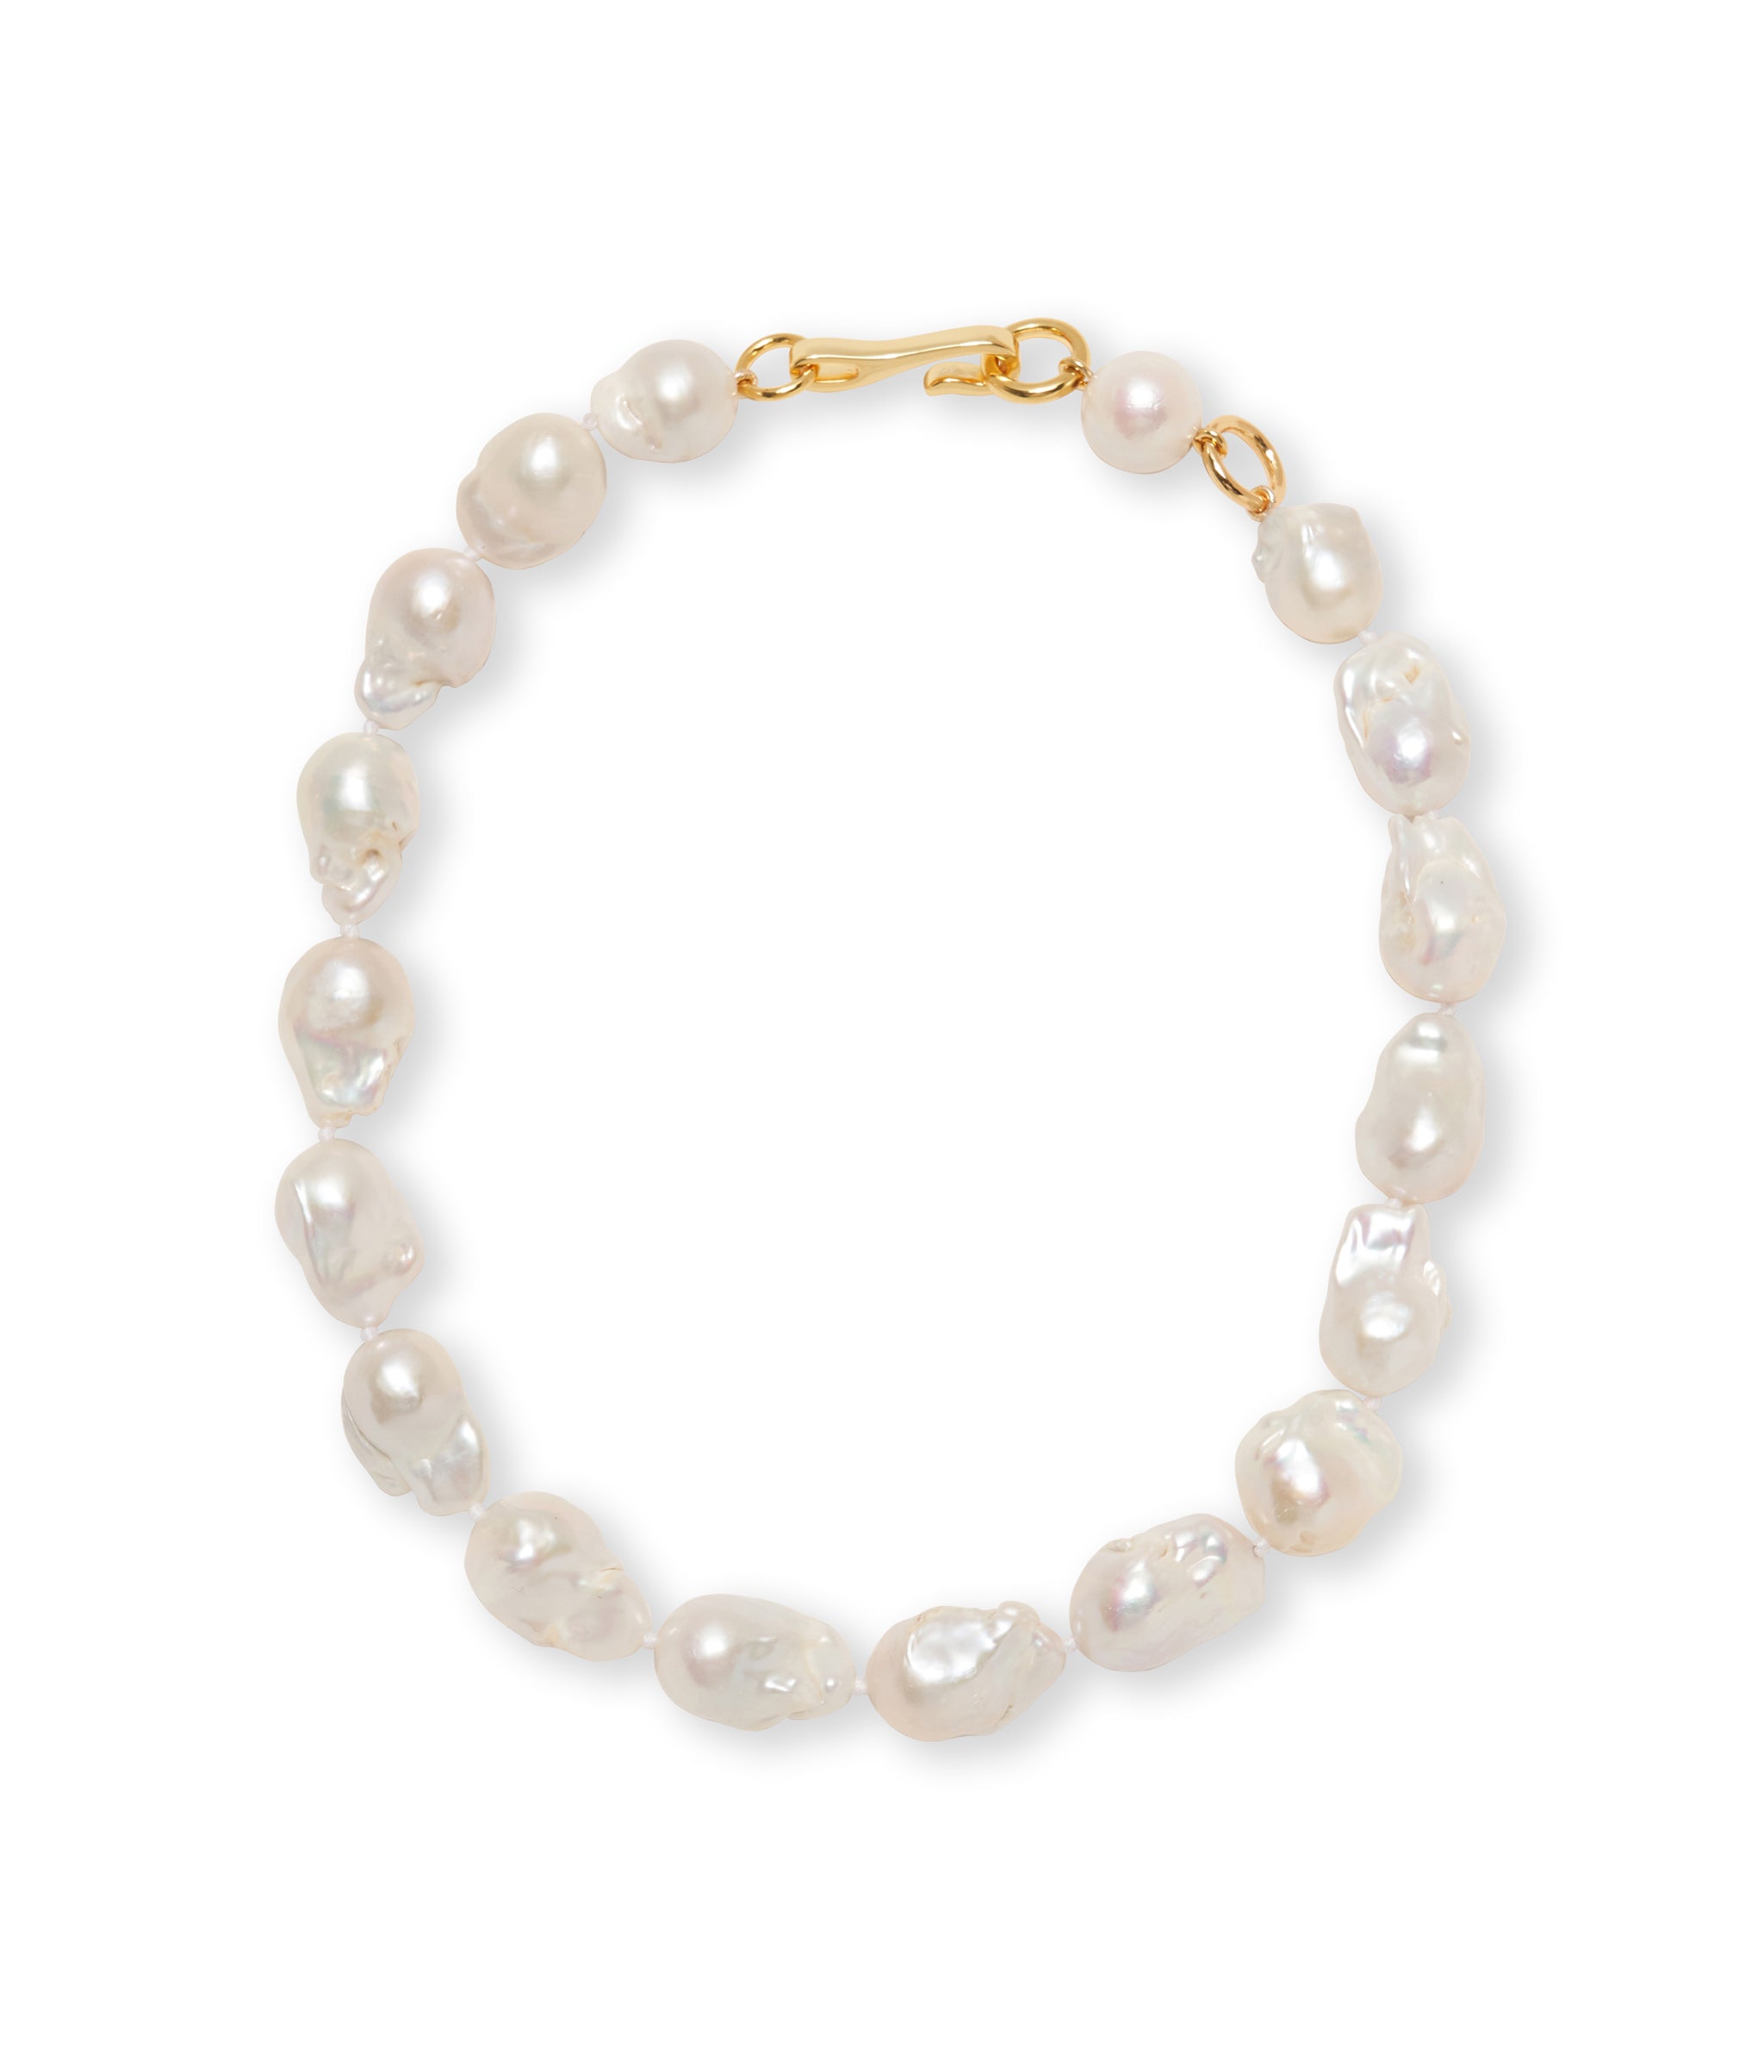 Claude Necklace. Single strand of oversized Baroque pearls with gold-plated closure.